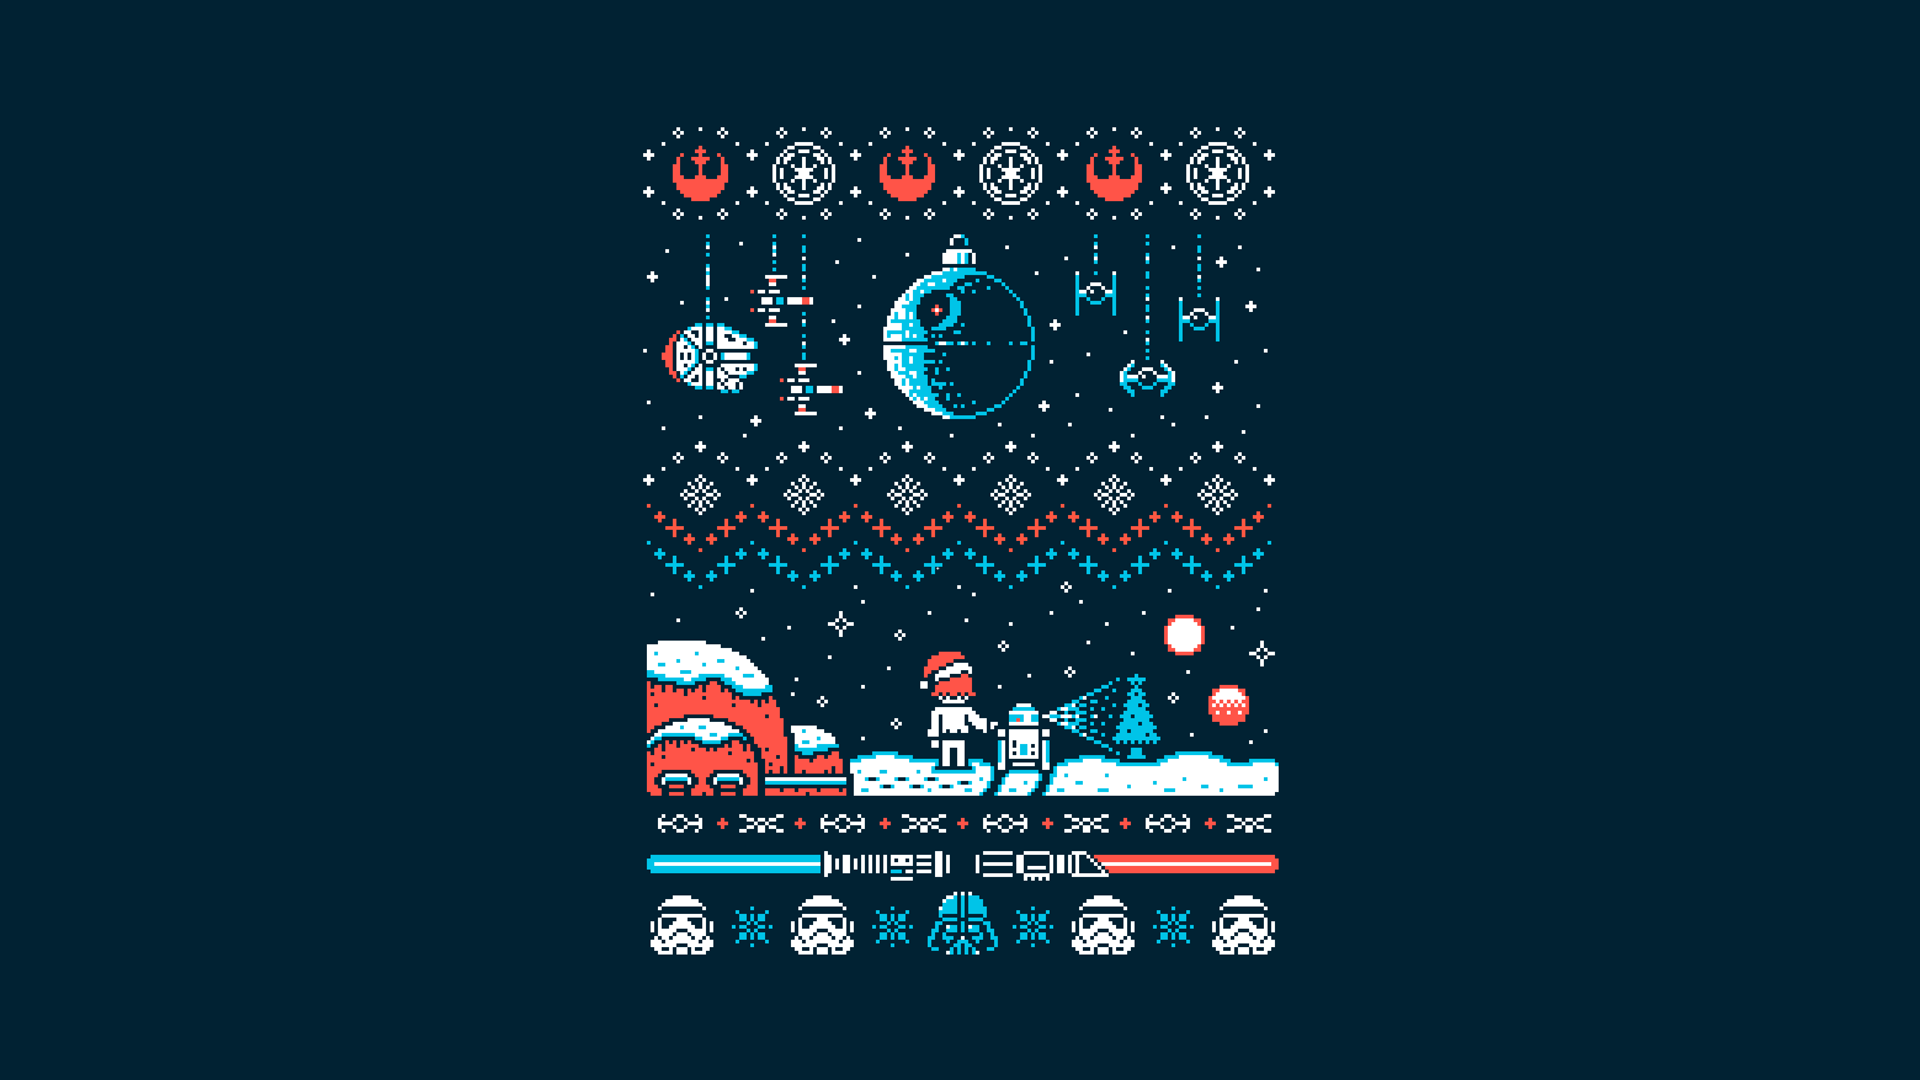 Turned this Star Wars Christmas sweater design into a wallpaper